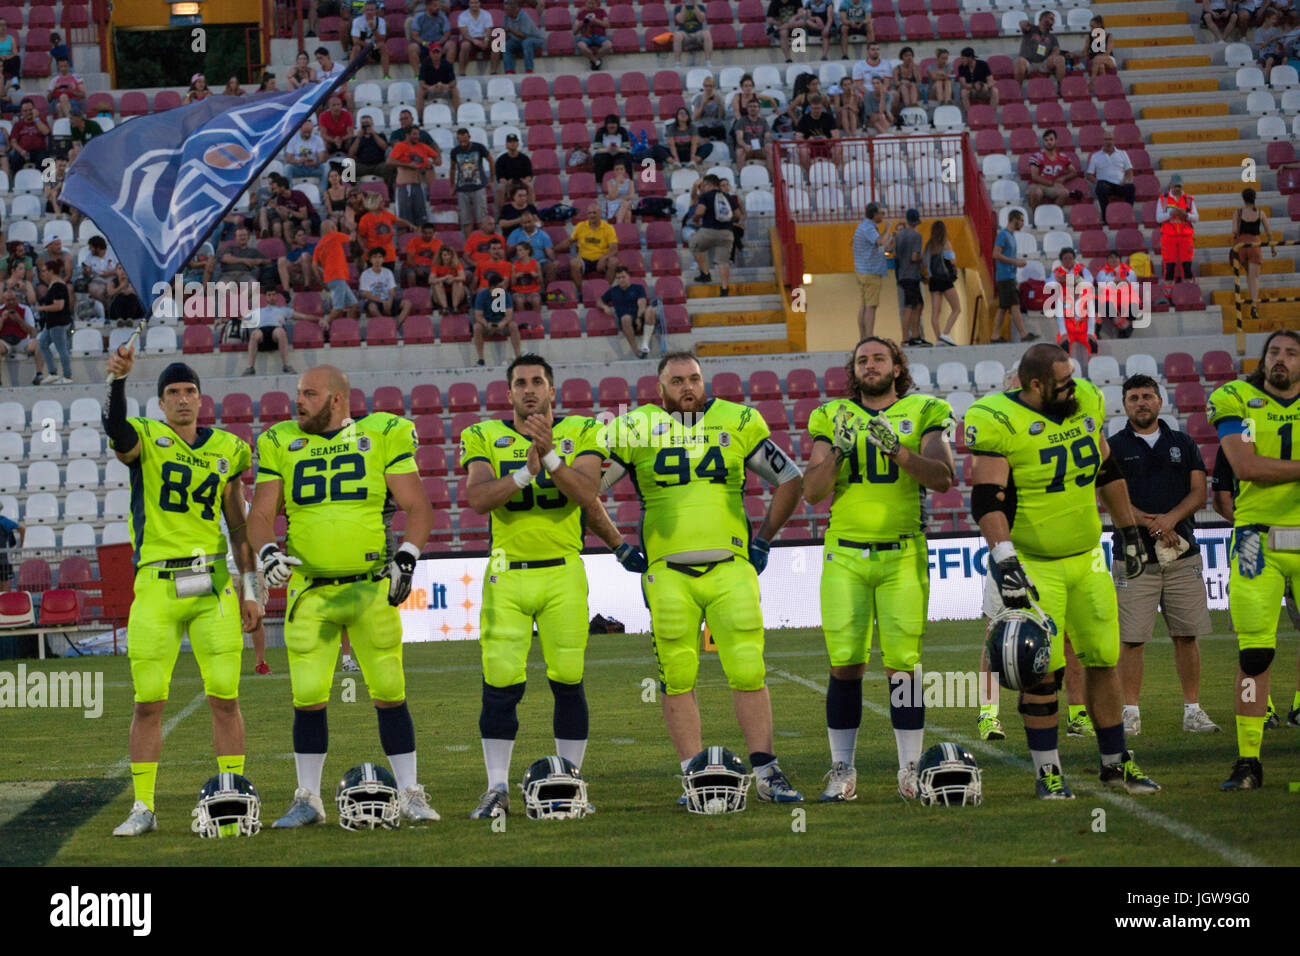 Vicenza, Italy. 08th July, 2017. For the first time in the Milano Seamen's short history, they will be facing crosstown rivals and defending champions, the Milano Rhinos in the Italian Bowl Saturday July 8 in Stadio Romeo Menti, Vicenza. Credit: Antonio Melita/Pacific Press/Alamy Live News Stock Photo